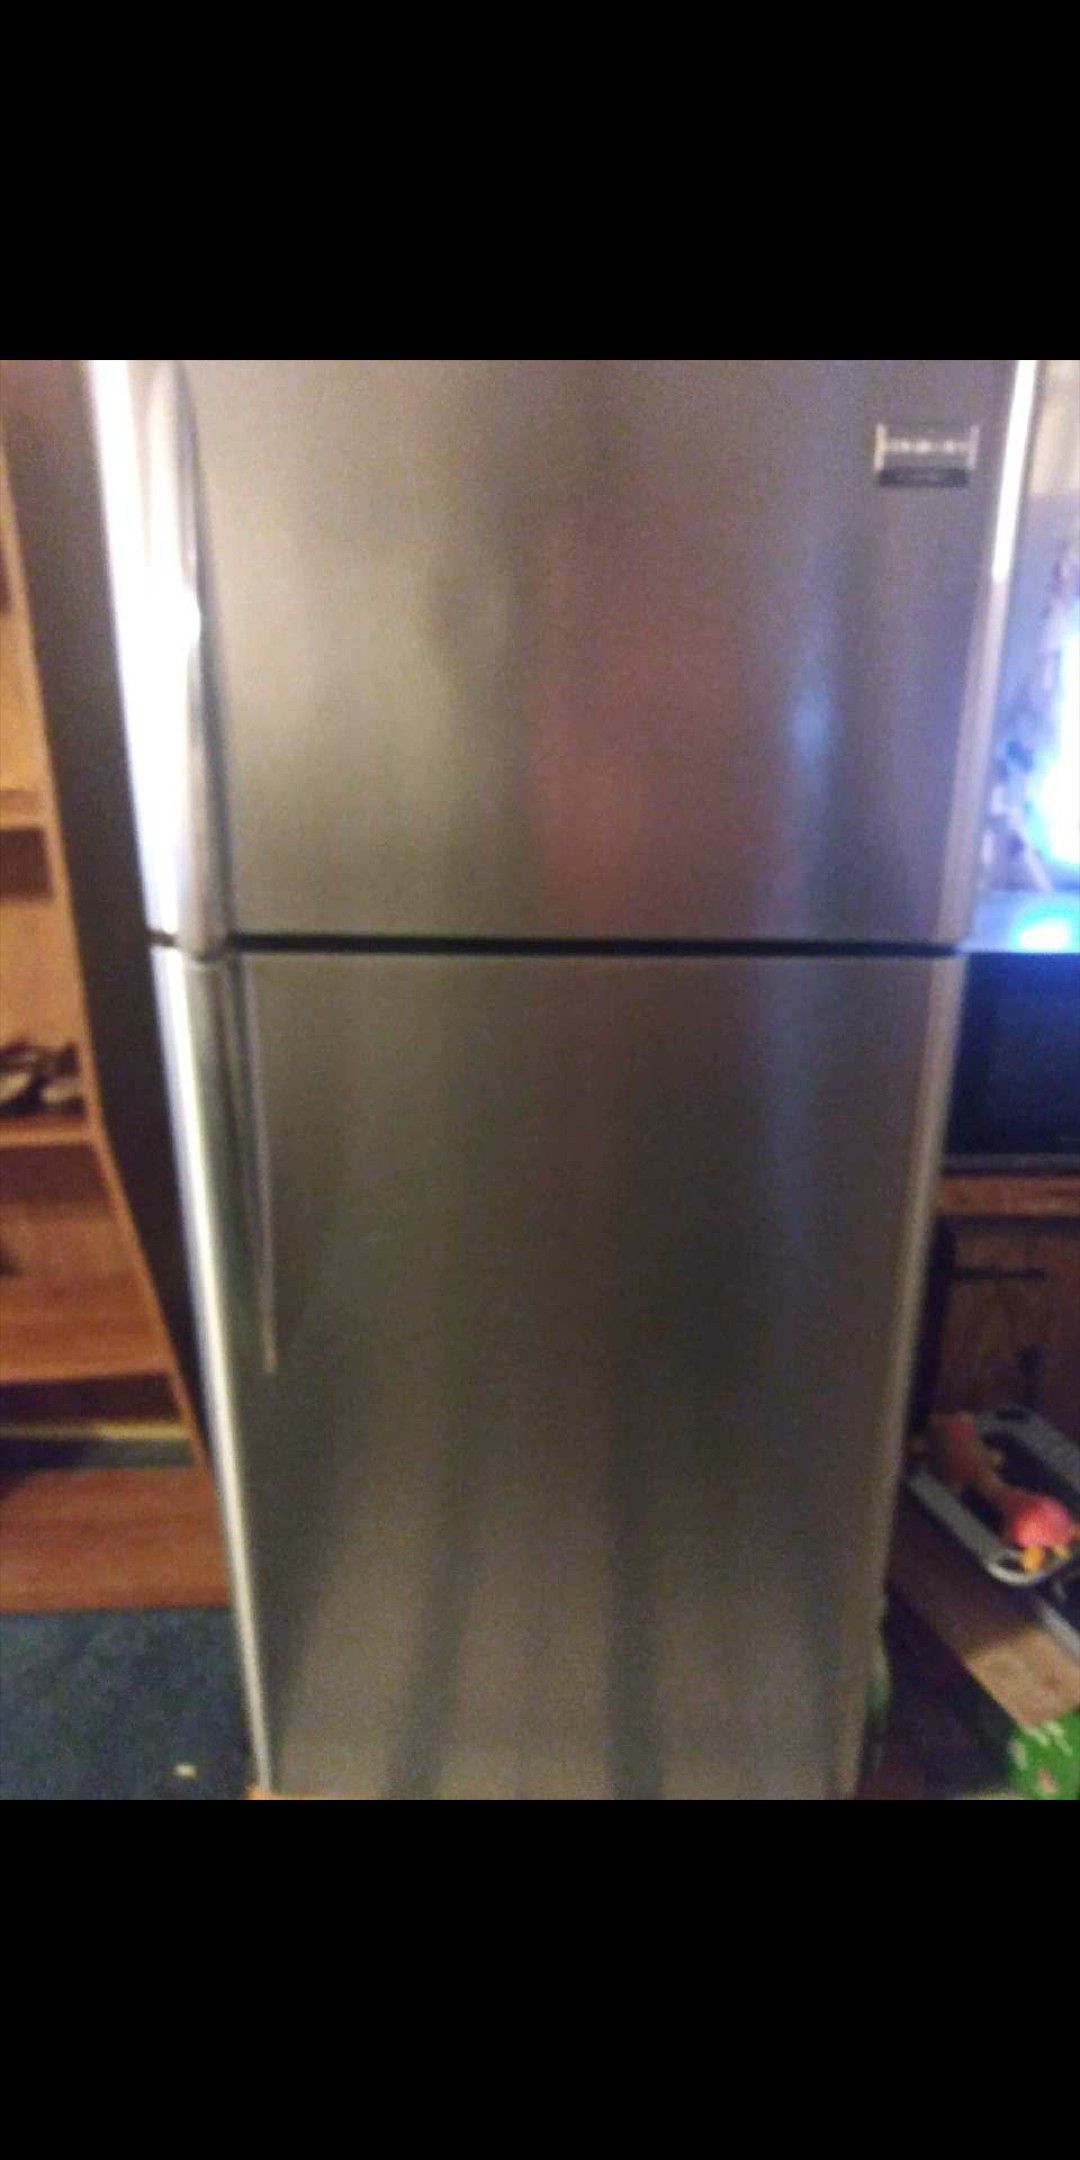 Frigidaire refrigerator top and bottom like new. It's in great shape outside is easy wipe clean.